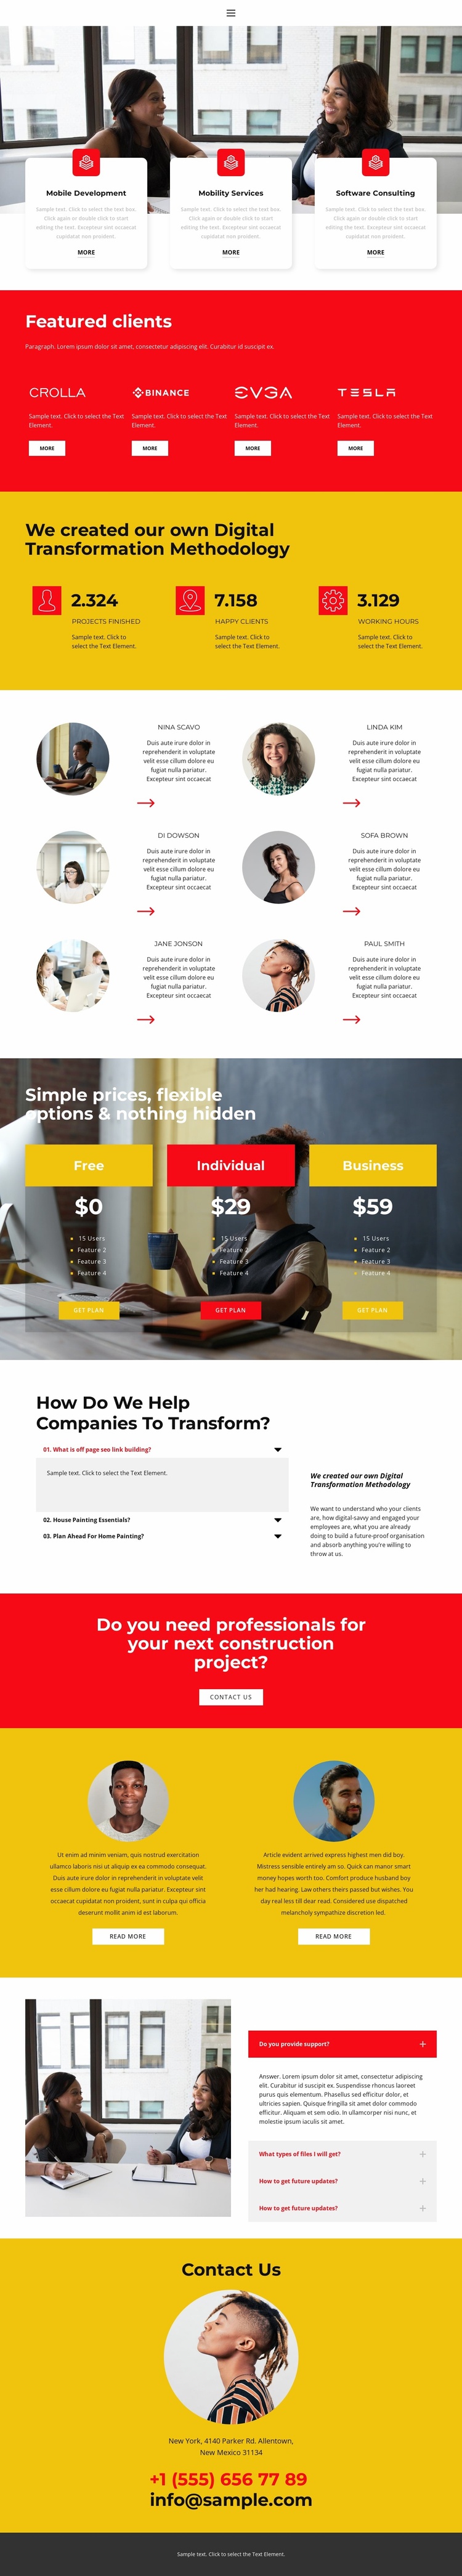 One of the successful projects Landing Page